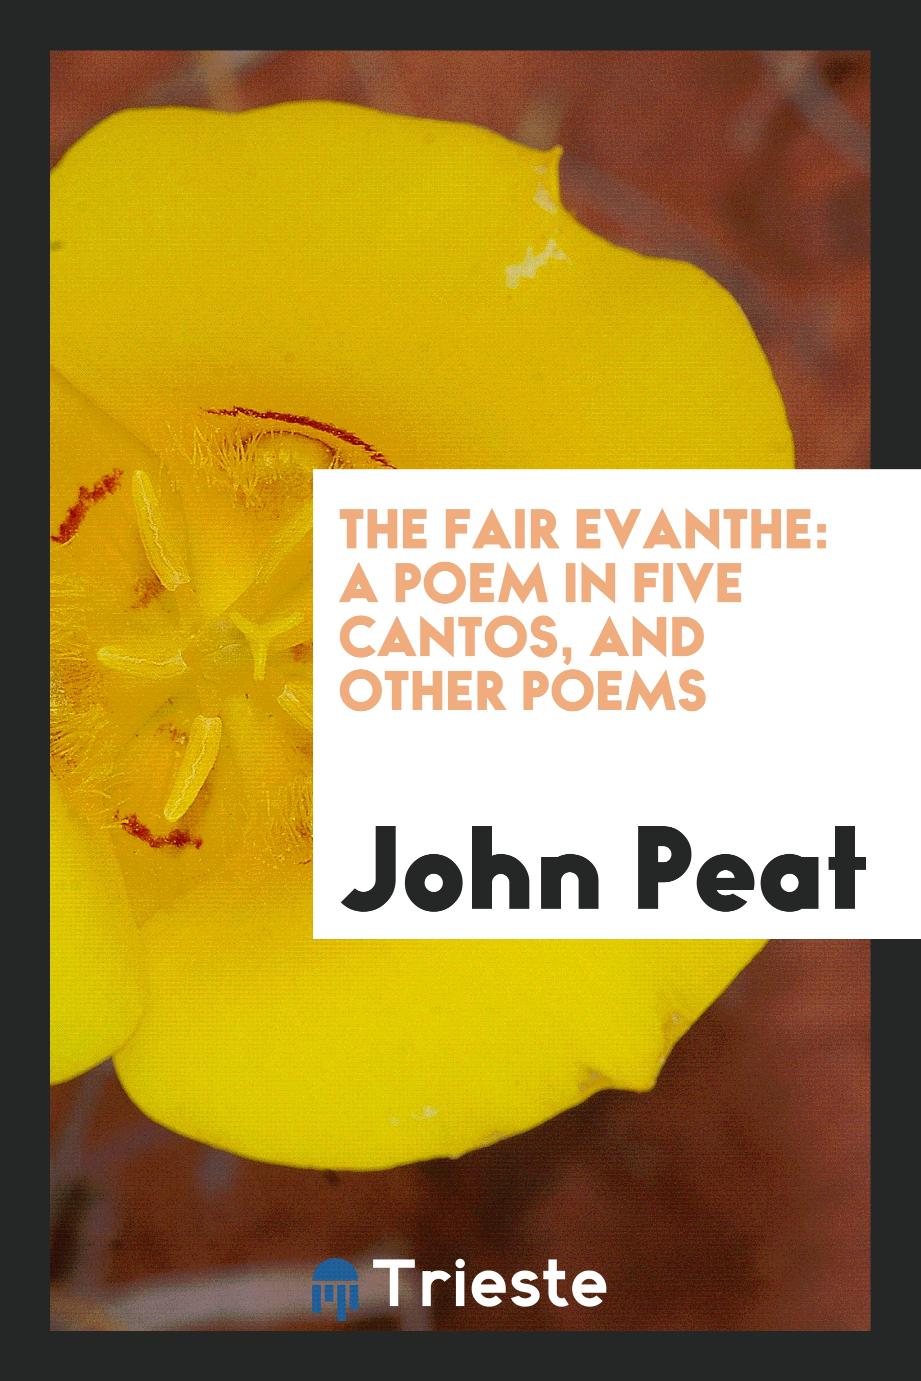 The Fair Evanthe: A Poem in Five Cantos, and Other Poems